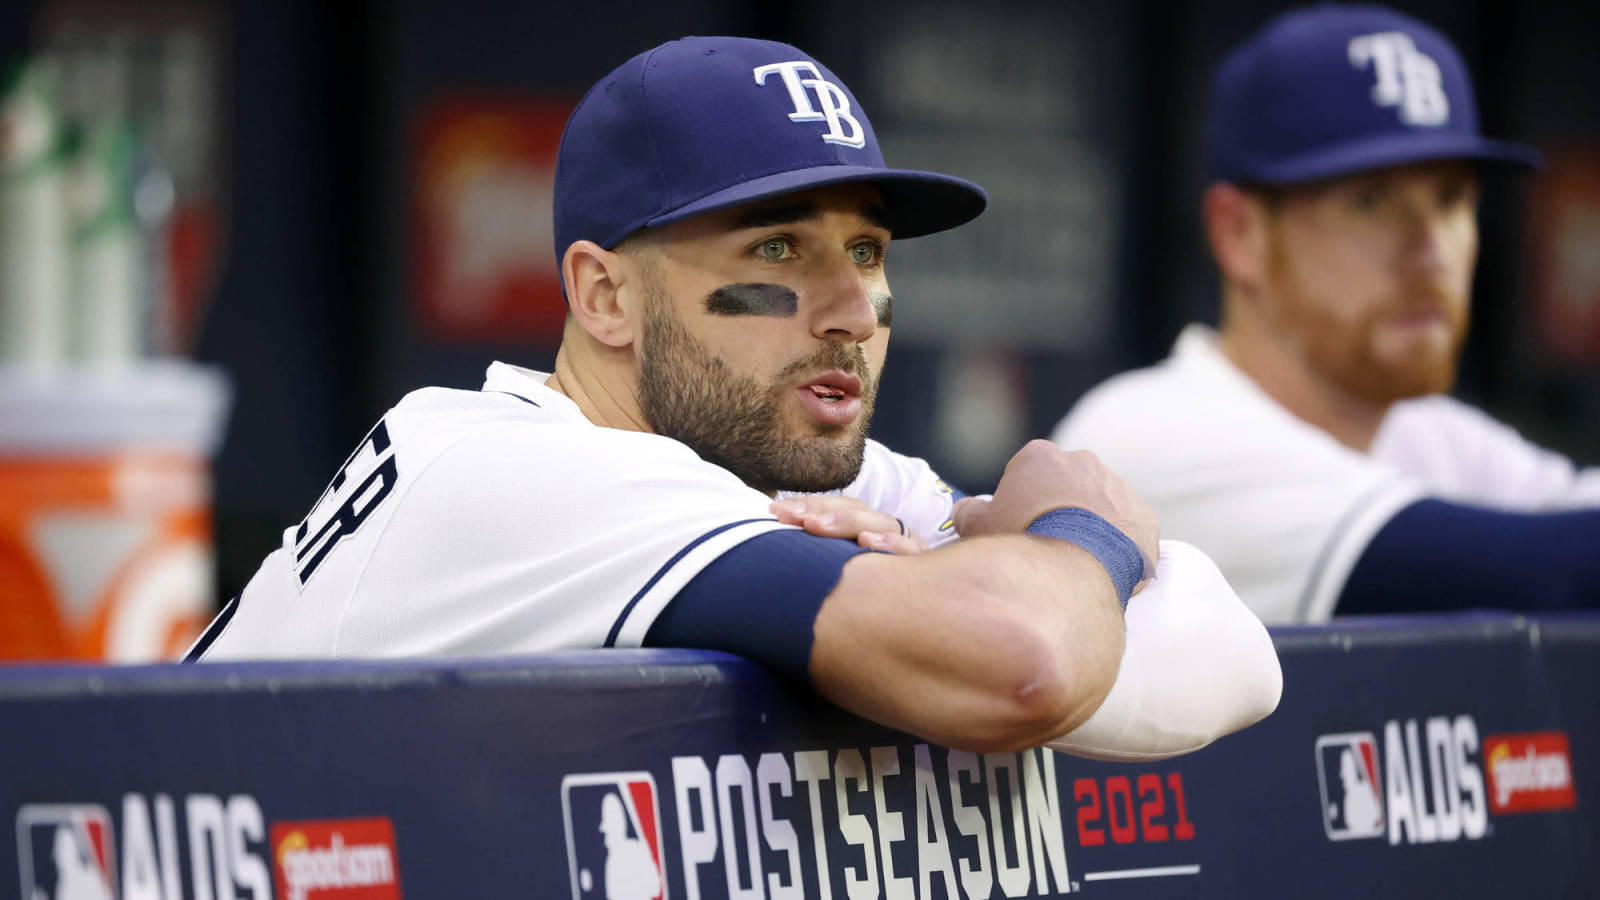 MLB rumors: Rays open to trading Austin Meadows; Mariners haven